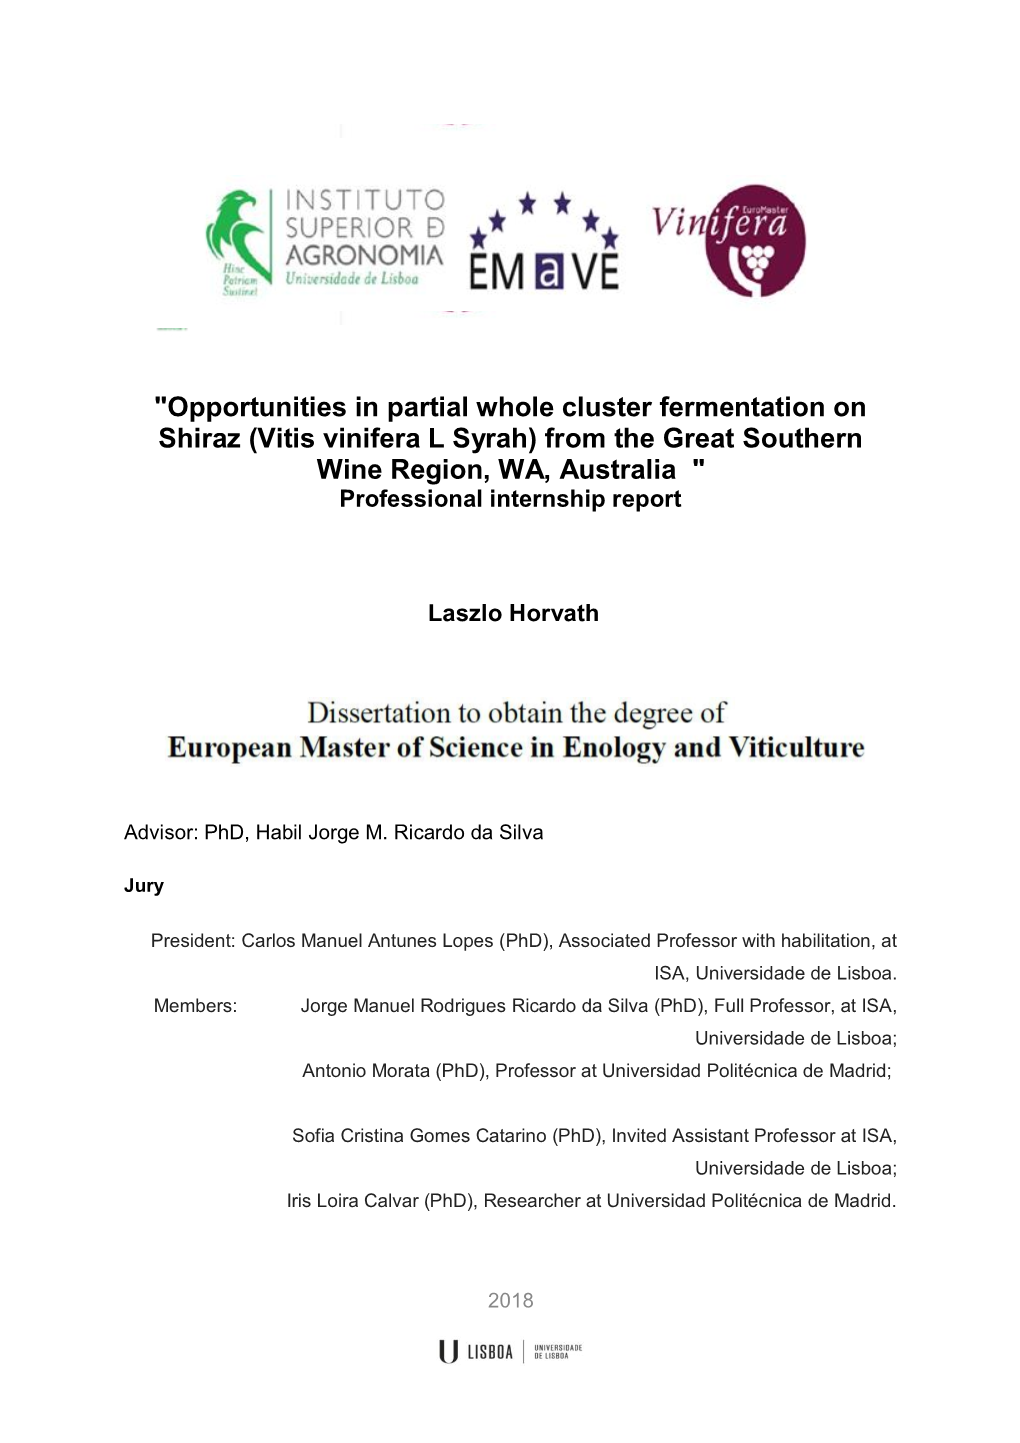 "Opportunities in Partial Whole Cluster Fermentation on Shiraz (Vitis Vinifera L Syrah) from the Great Southern Wine Region